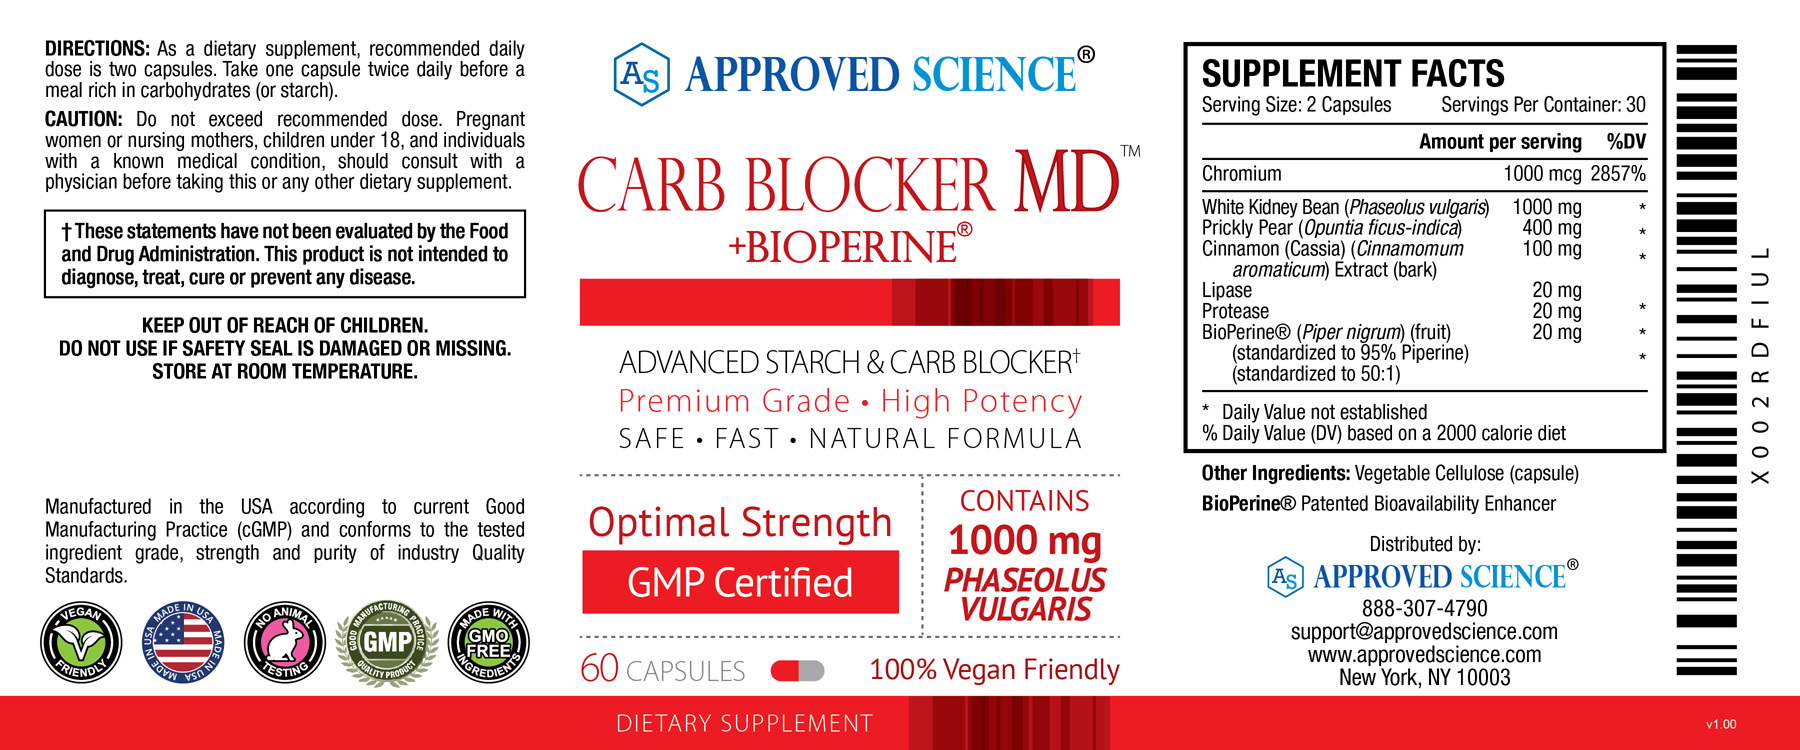 Carb Blocker MD™ Supplement Facts